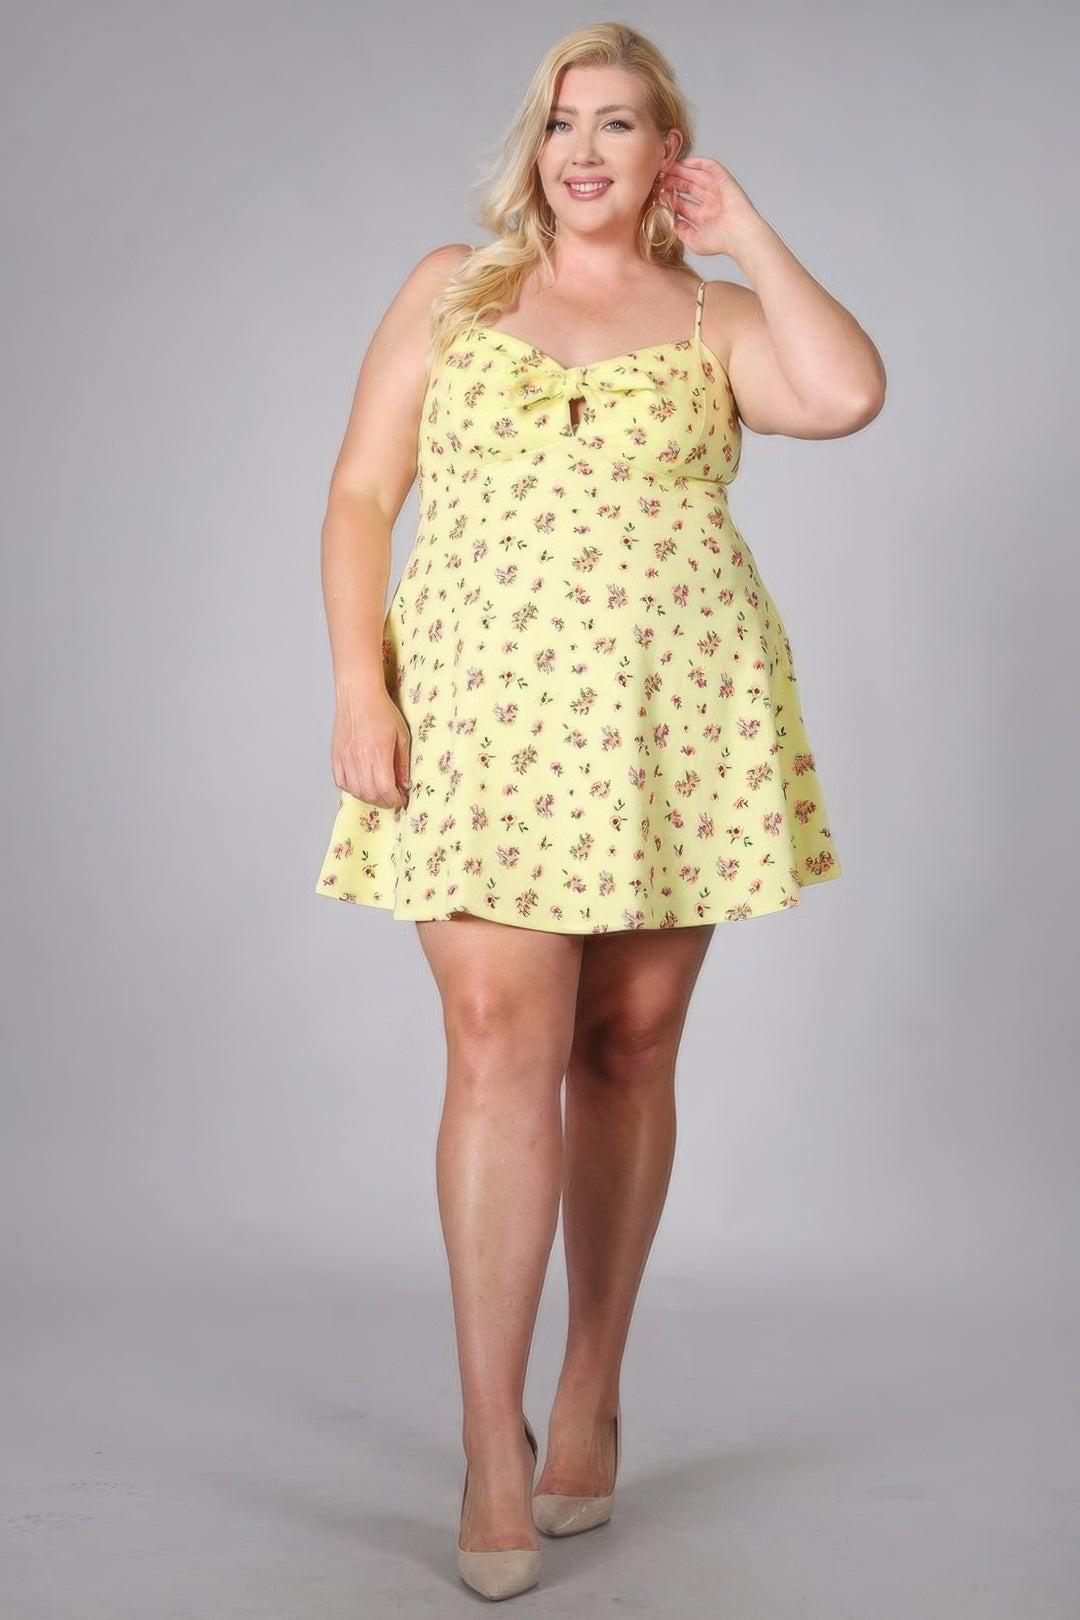 Plus Size Floral Fit And Flare Dress - bertofonsi